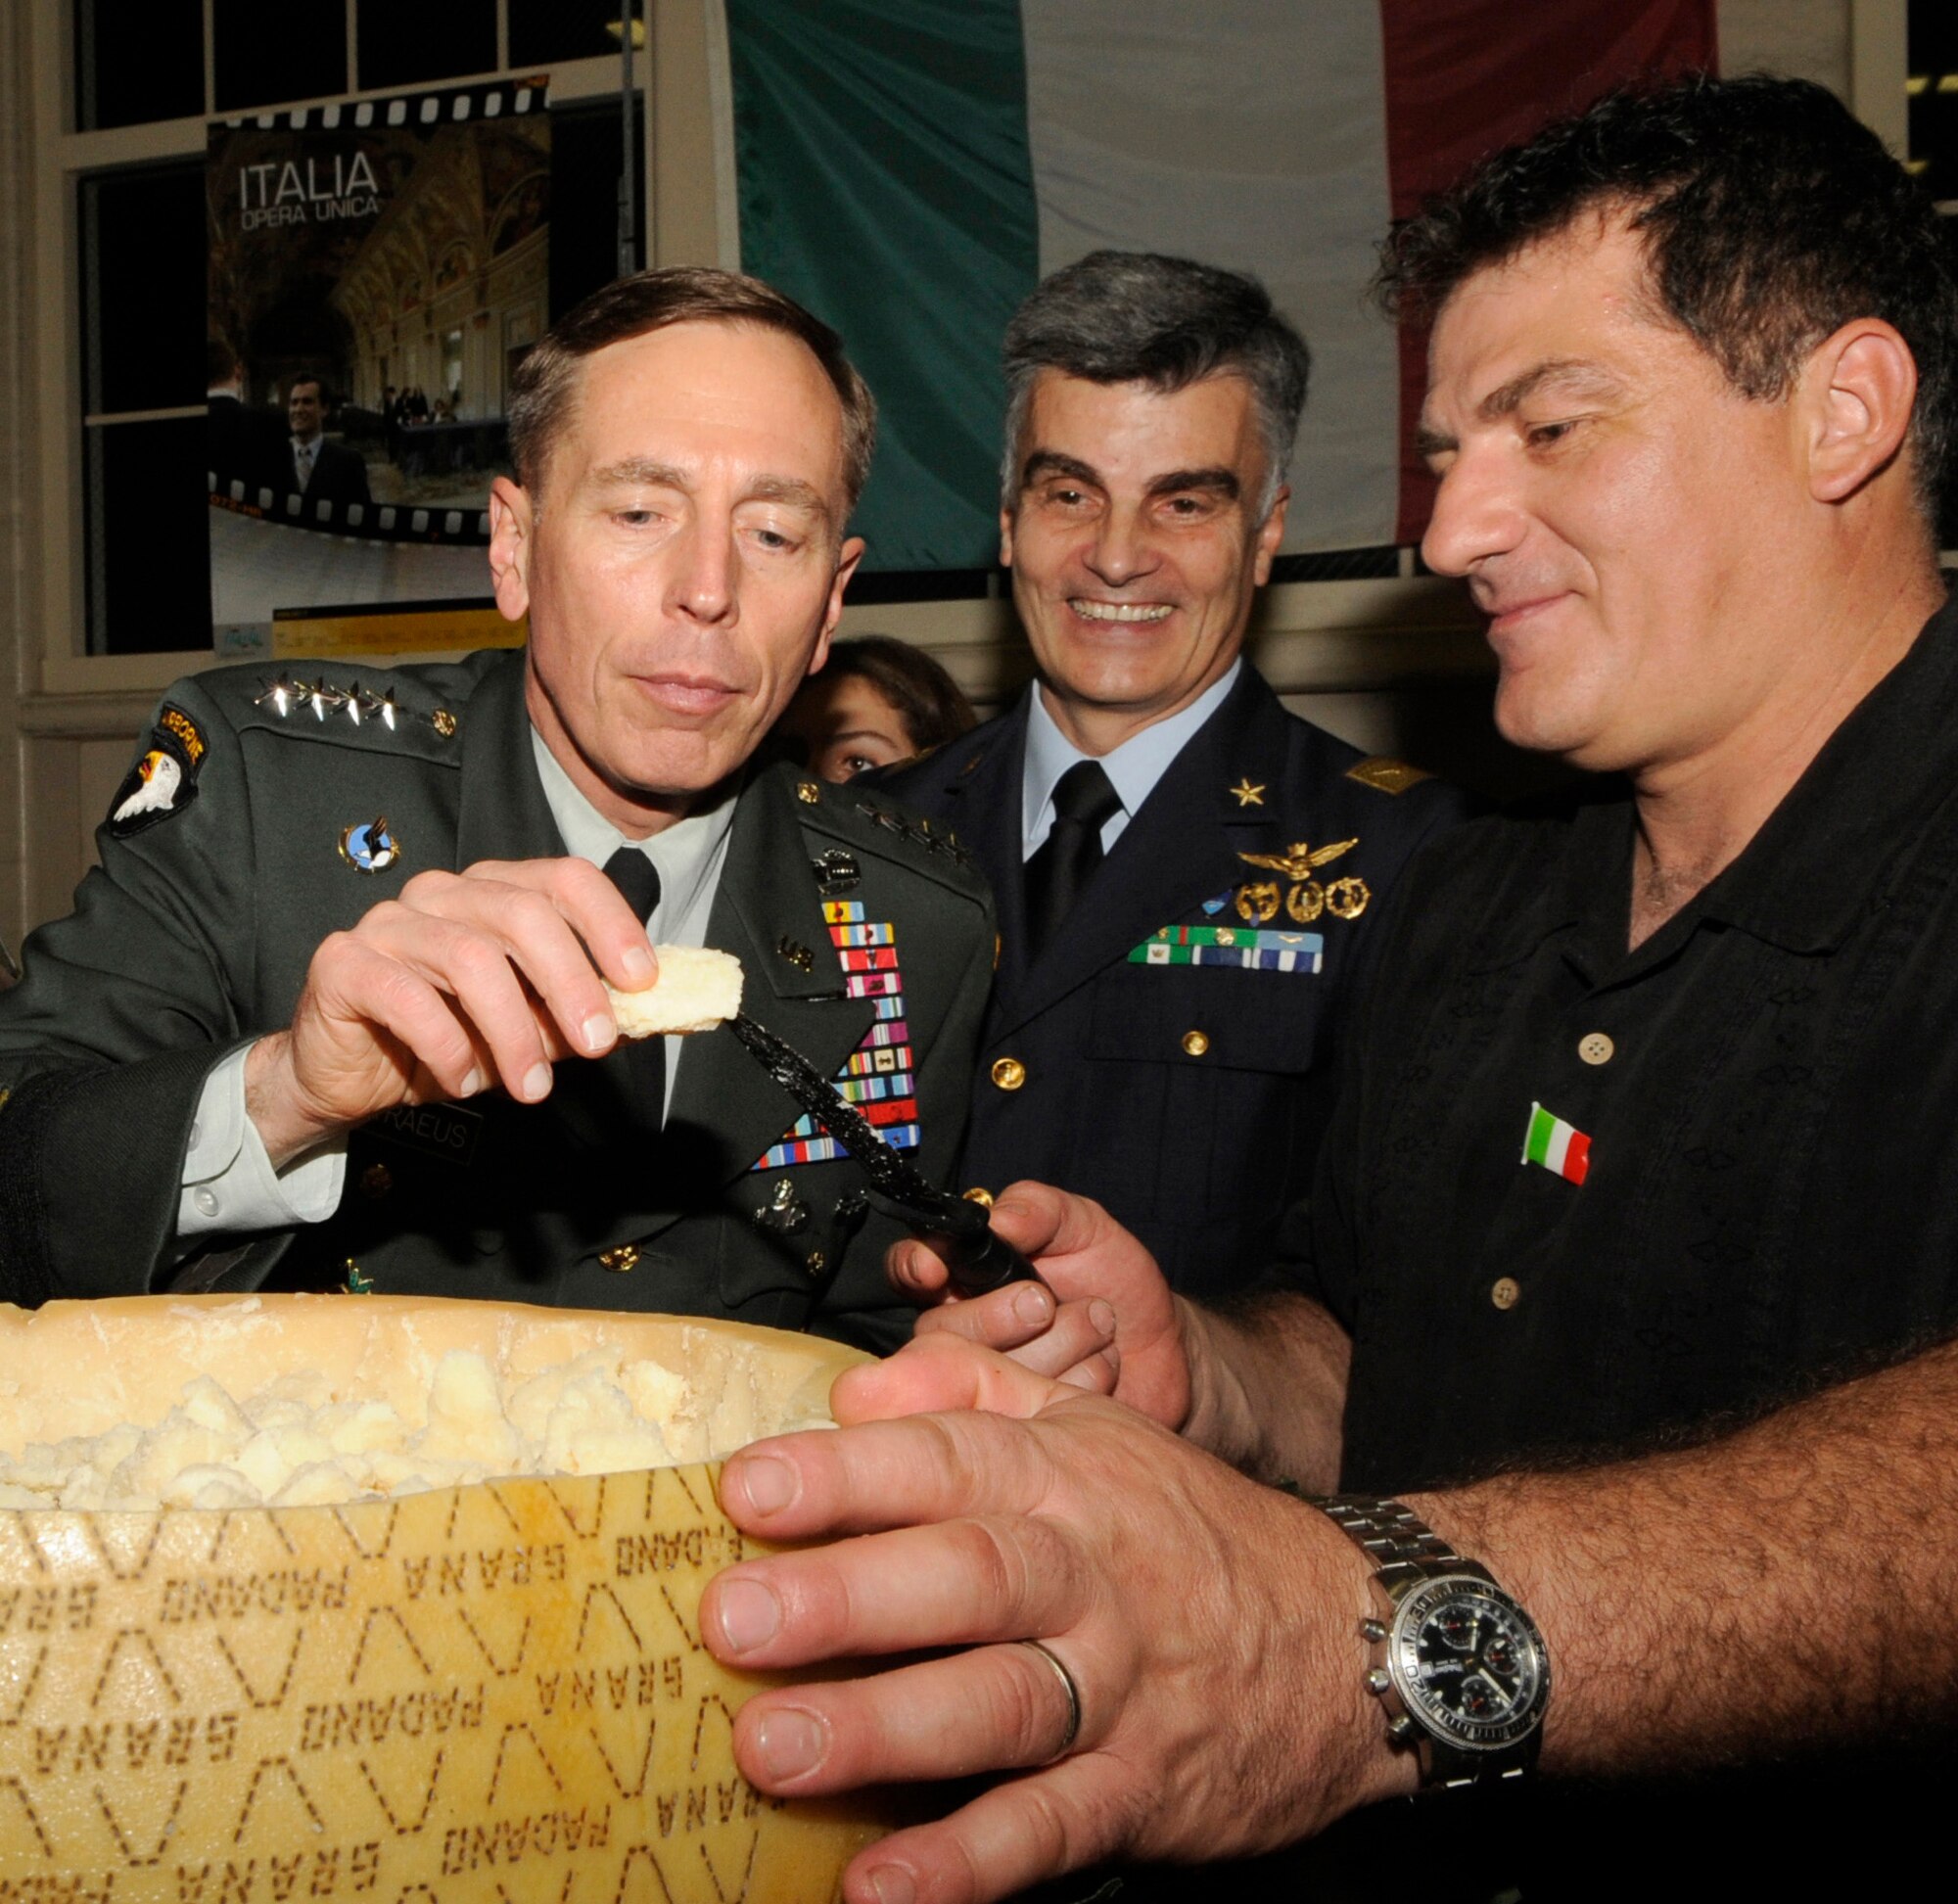 Gen. David Petraeus, United States Central Command commander, samples a piece of the legendary Parmigiano-Reggiano while Luigi and Brig. Gen. Enrico P. Bassignano, the Italian Senior Representative from CENTCOM, stand by to watch during the Coalition International Night held here in Hangar 1, Dec. 16. This year’s event marks the 5th anniversary of the annual tradition that allows military members and families to become more familiar with various native cuisines, customs and dress of the 63 different countries represented in the U.S. Central Command Coalition Village. During this event many Coalition members and their families volunteered to cook some of their countries favorite or famous cuisines to share. The event ended with the United States Central Command commander, Gen. David Petraeus, giving a thank you speech to all those who came out.